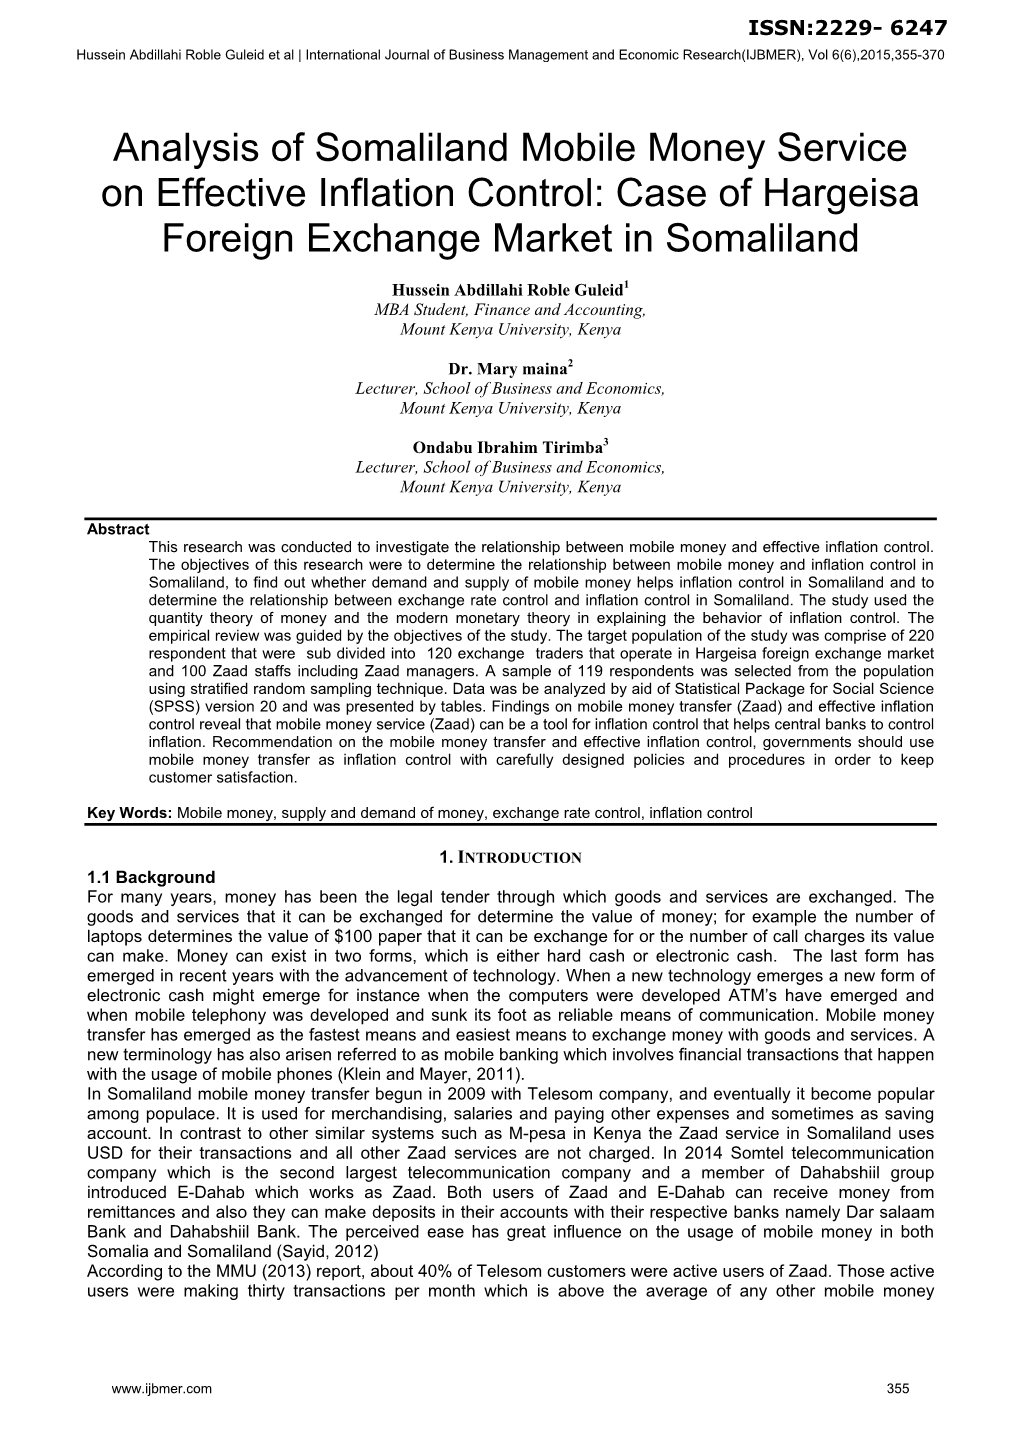 Analysis of Somaliland Mobile Money Service on Effective Inflation Control: Case of Hargeisa Foreign Exchange Market in Somaliland